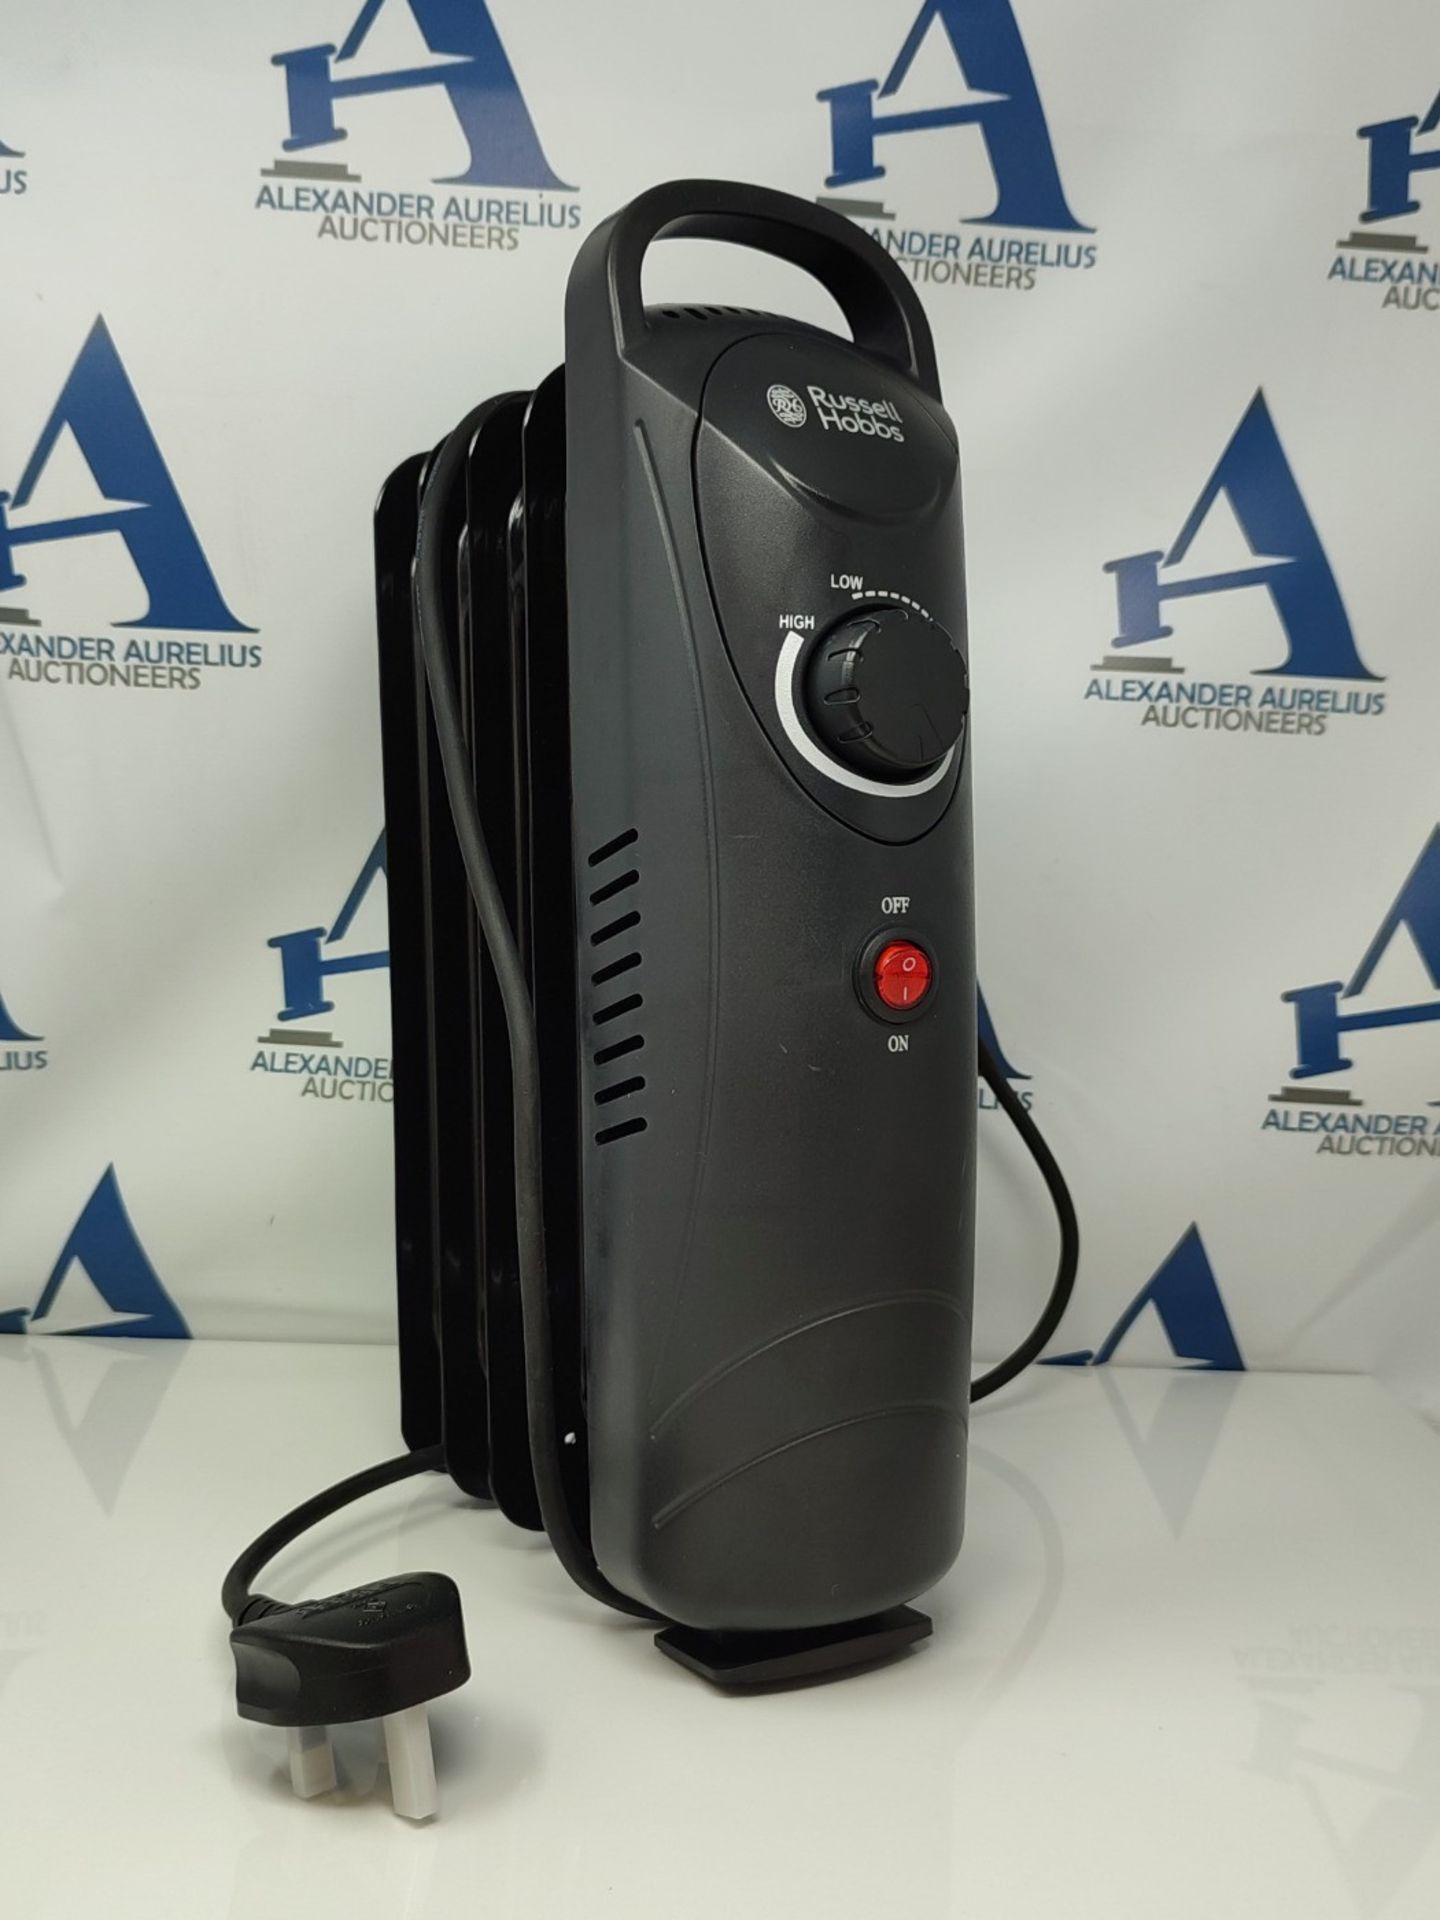 Russell Hobbs 650W Oil Filled Radiator, 5 Fin Portable Electric Heater - Black, Adjust - Image 3 of 3